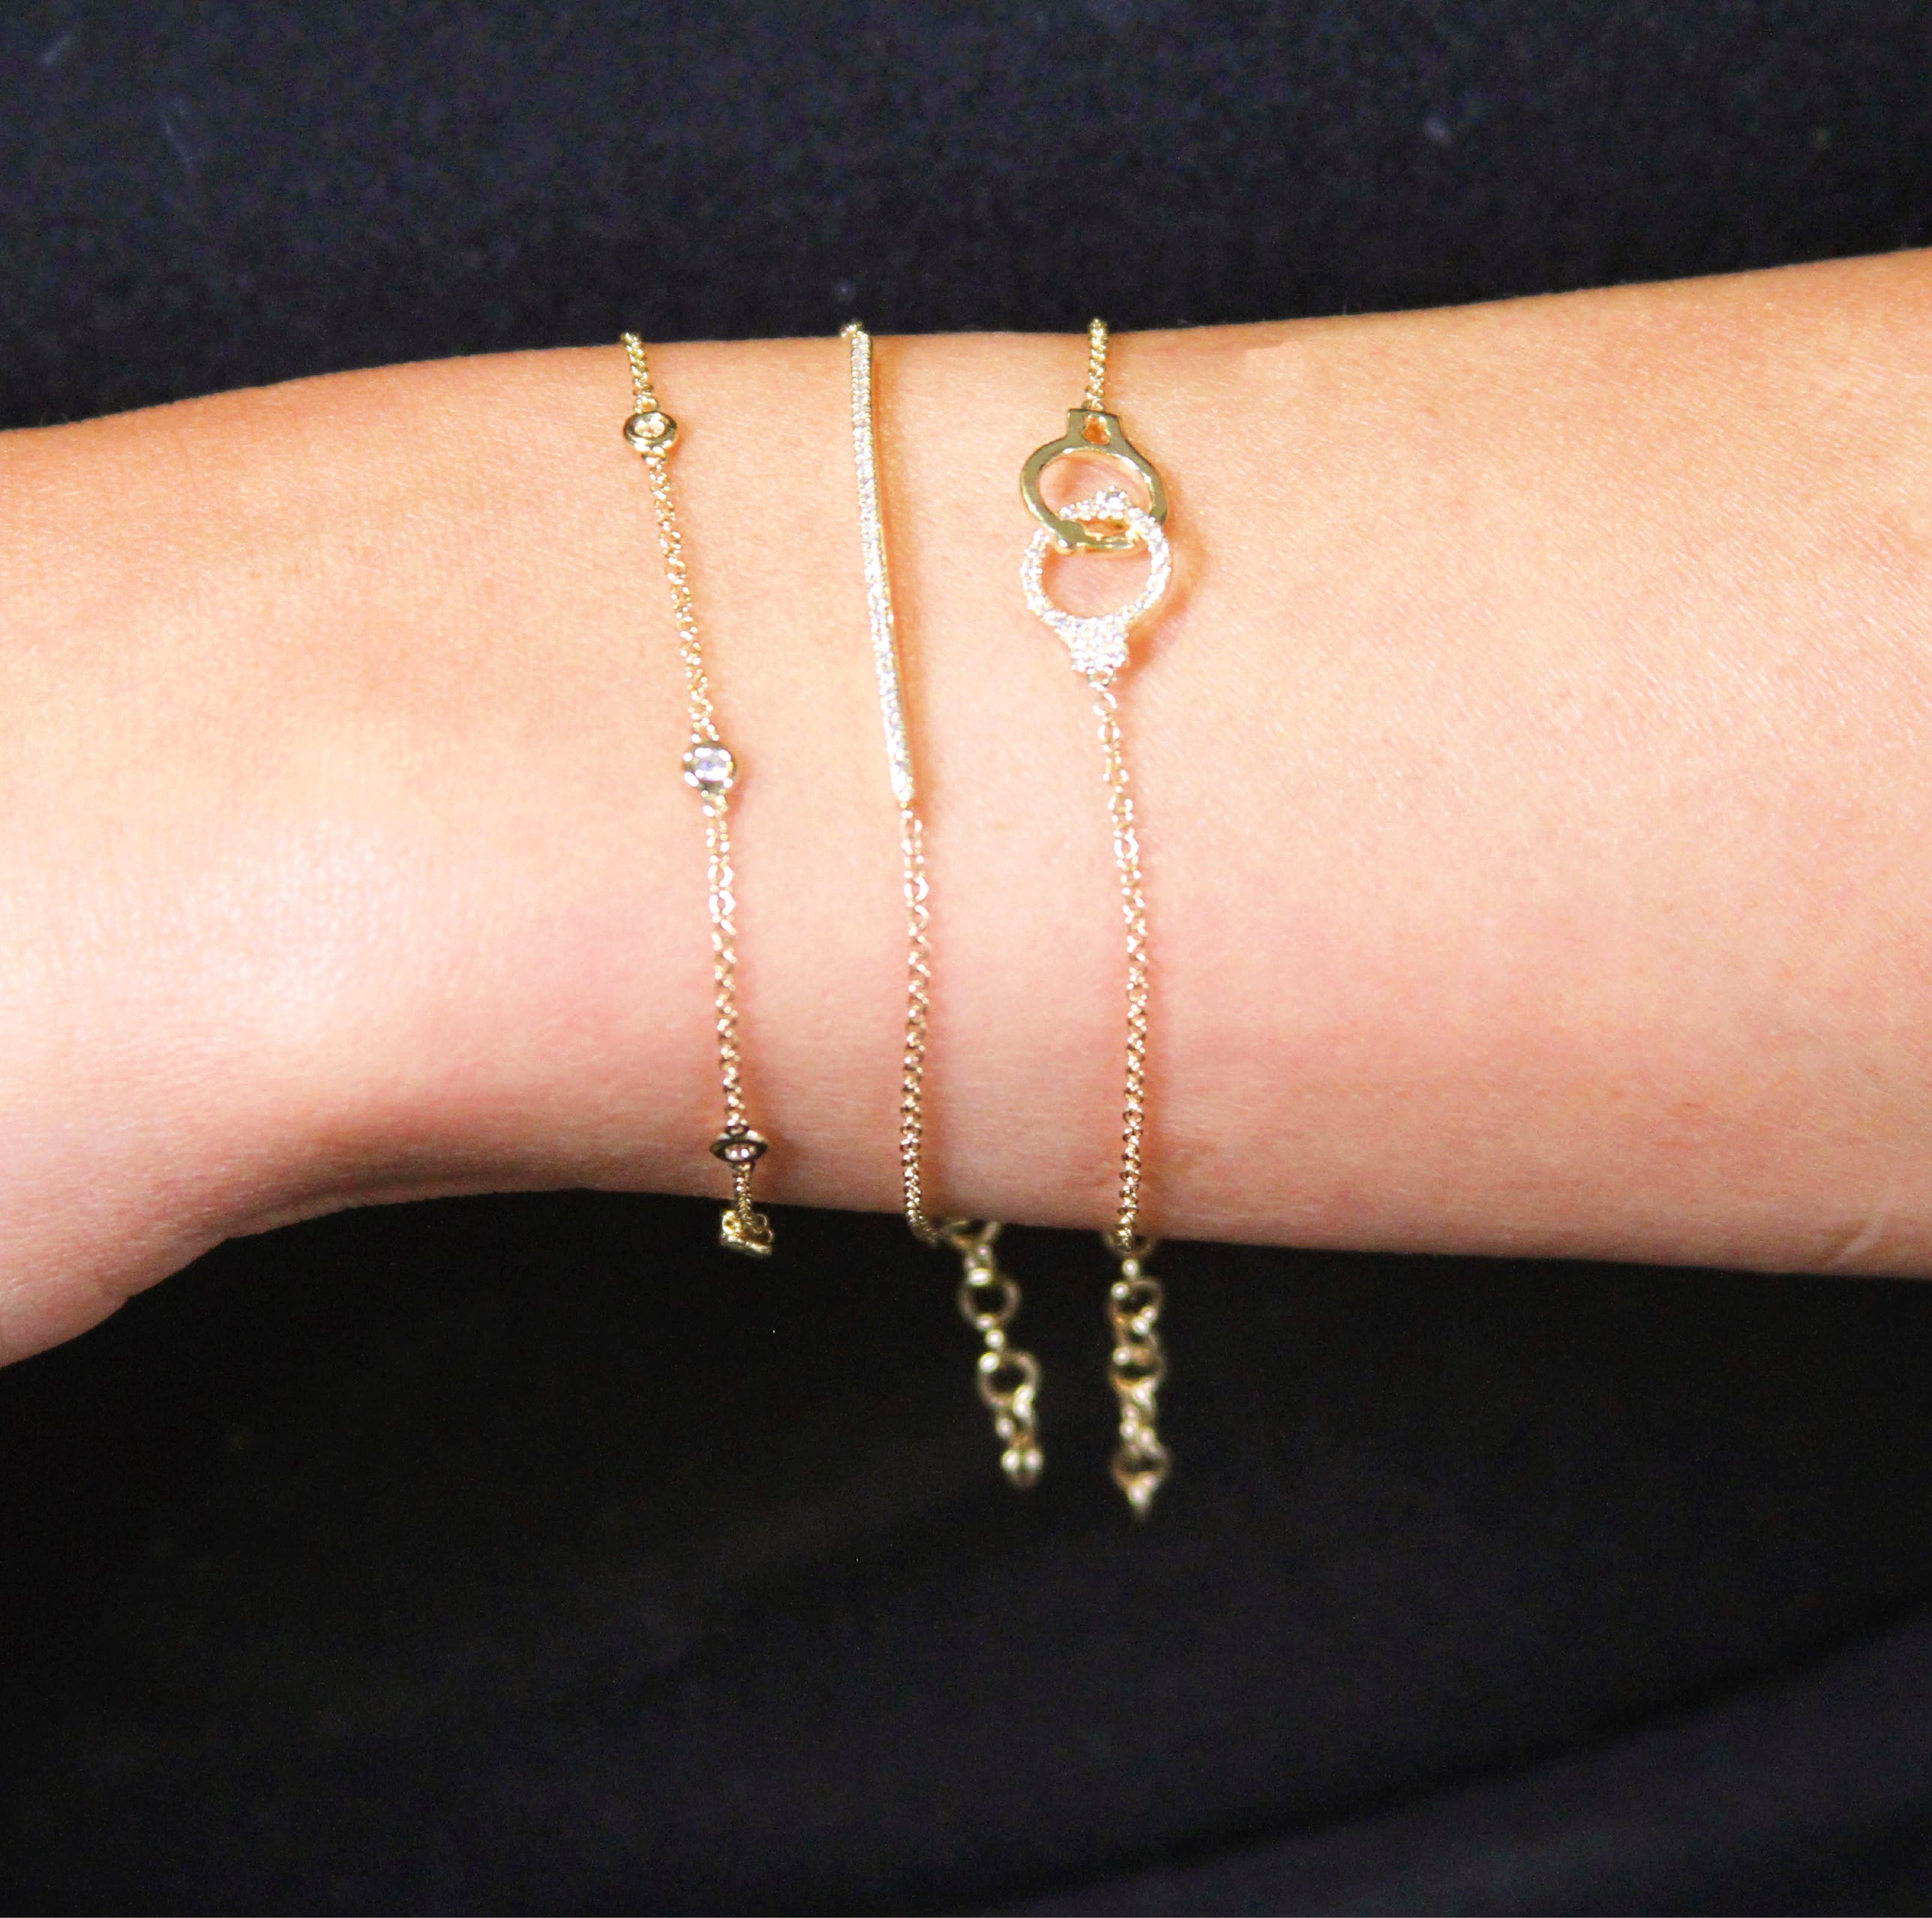 Oath Collection | Handcuff Jewelry | Gold Handcuff Bracelet